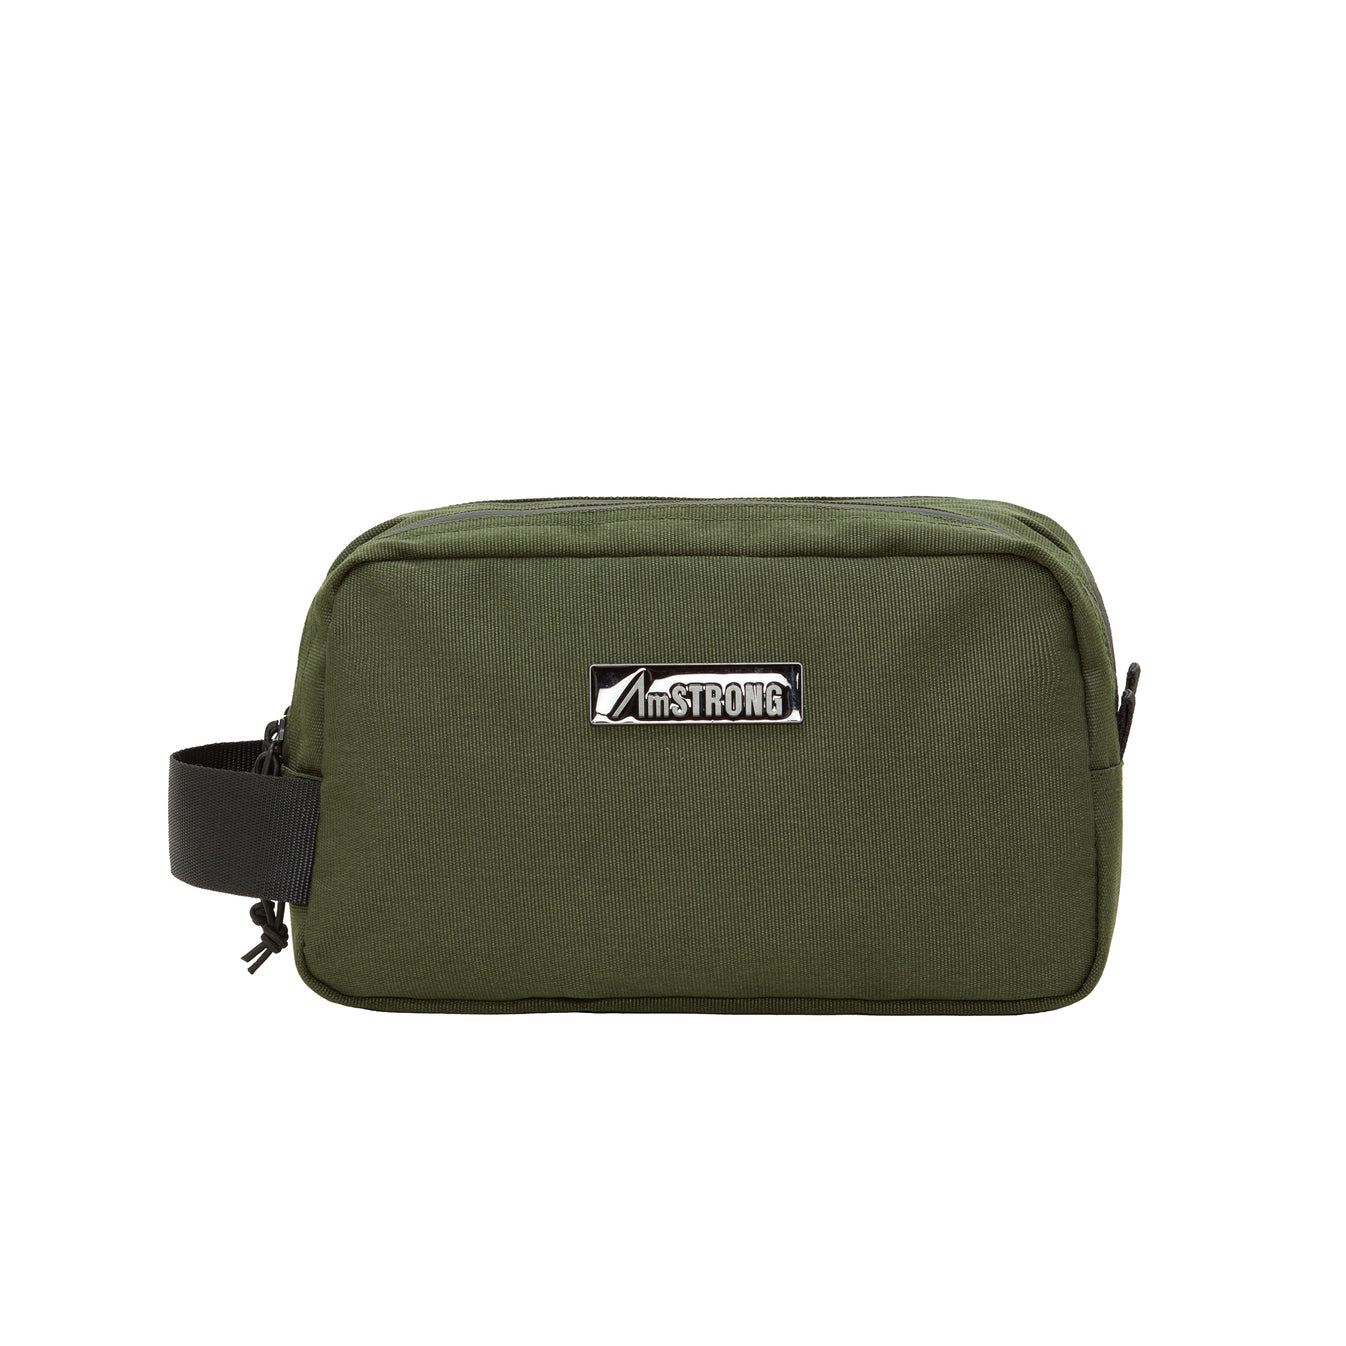 AmSTRONG | 02-GEAR BAG